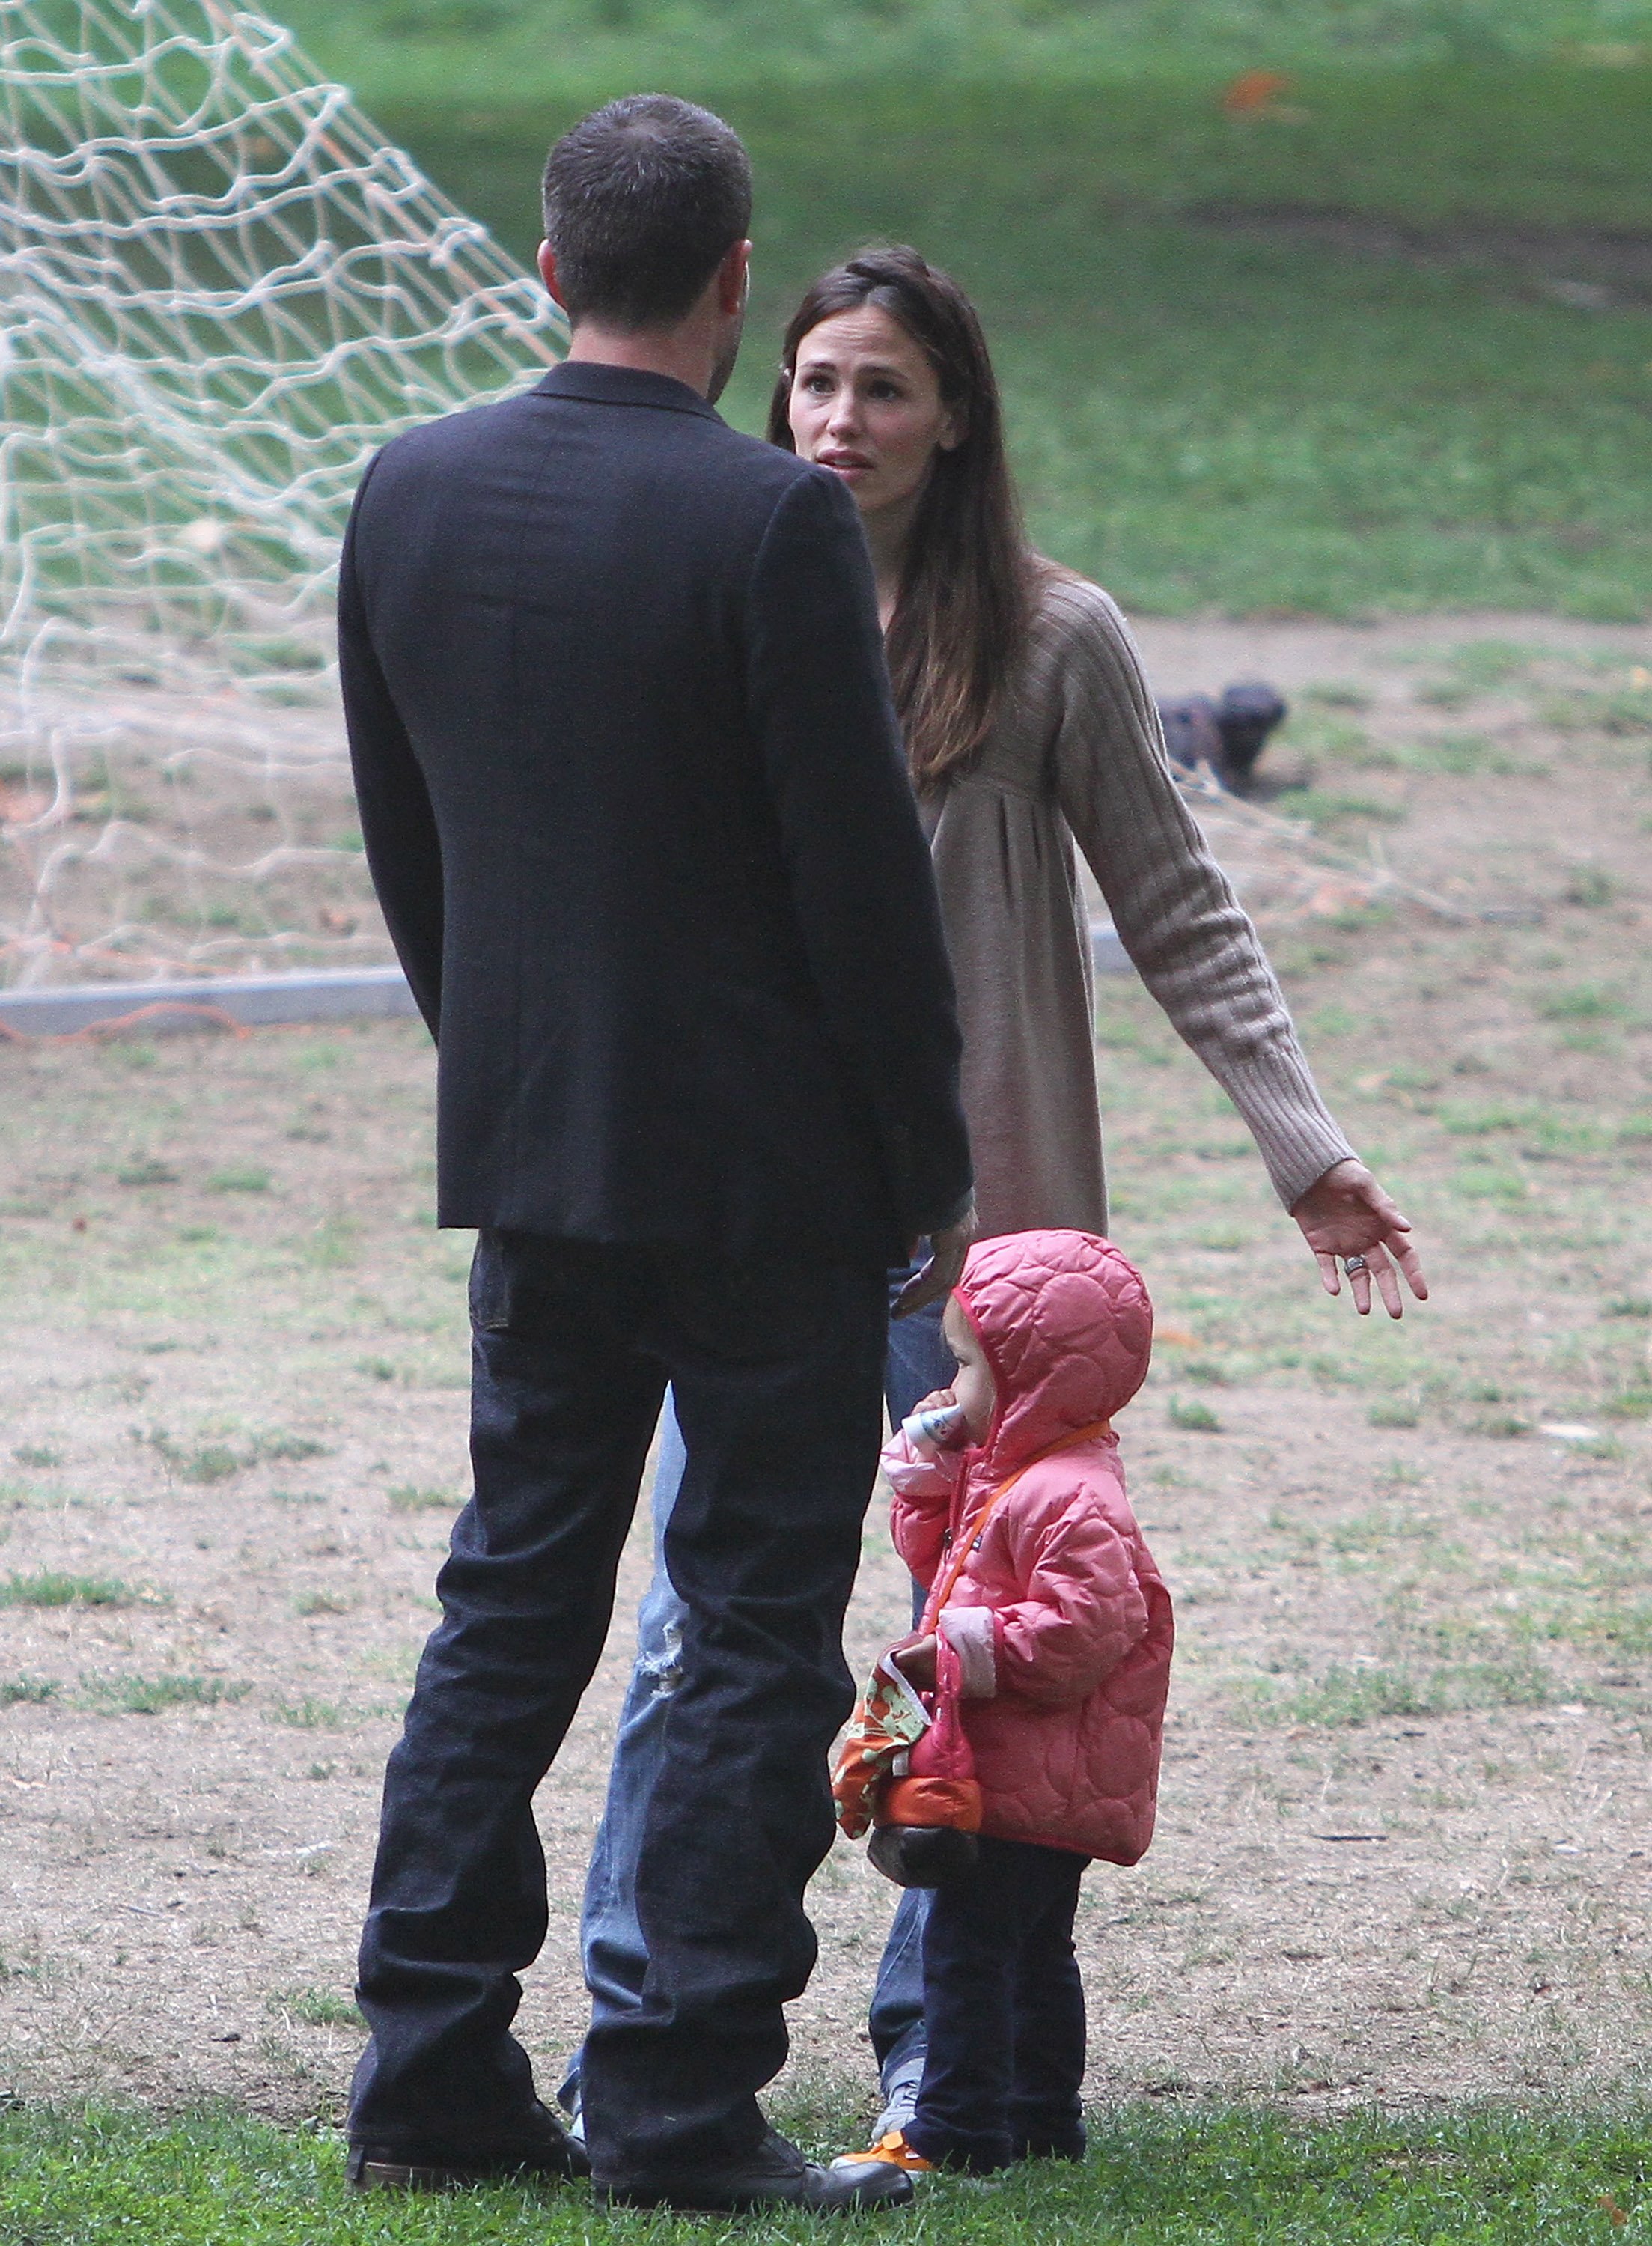 Ben Affleck and Jennifer Garner seen with a child on September 18, 2010, in Los Angeles, California. | Source: Jean Baptiste Lacroix/WireImage/Getty Images